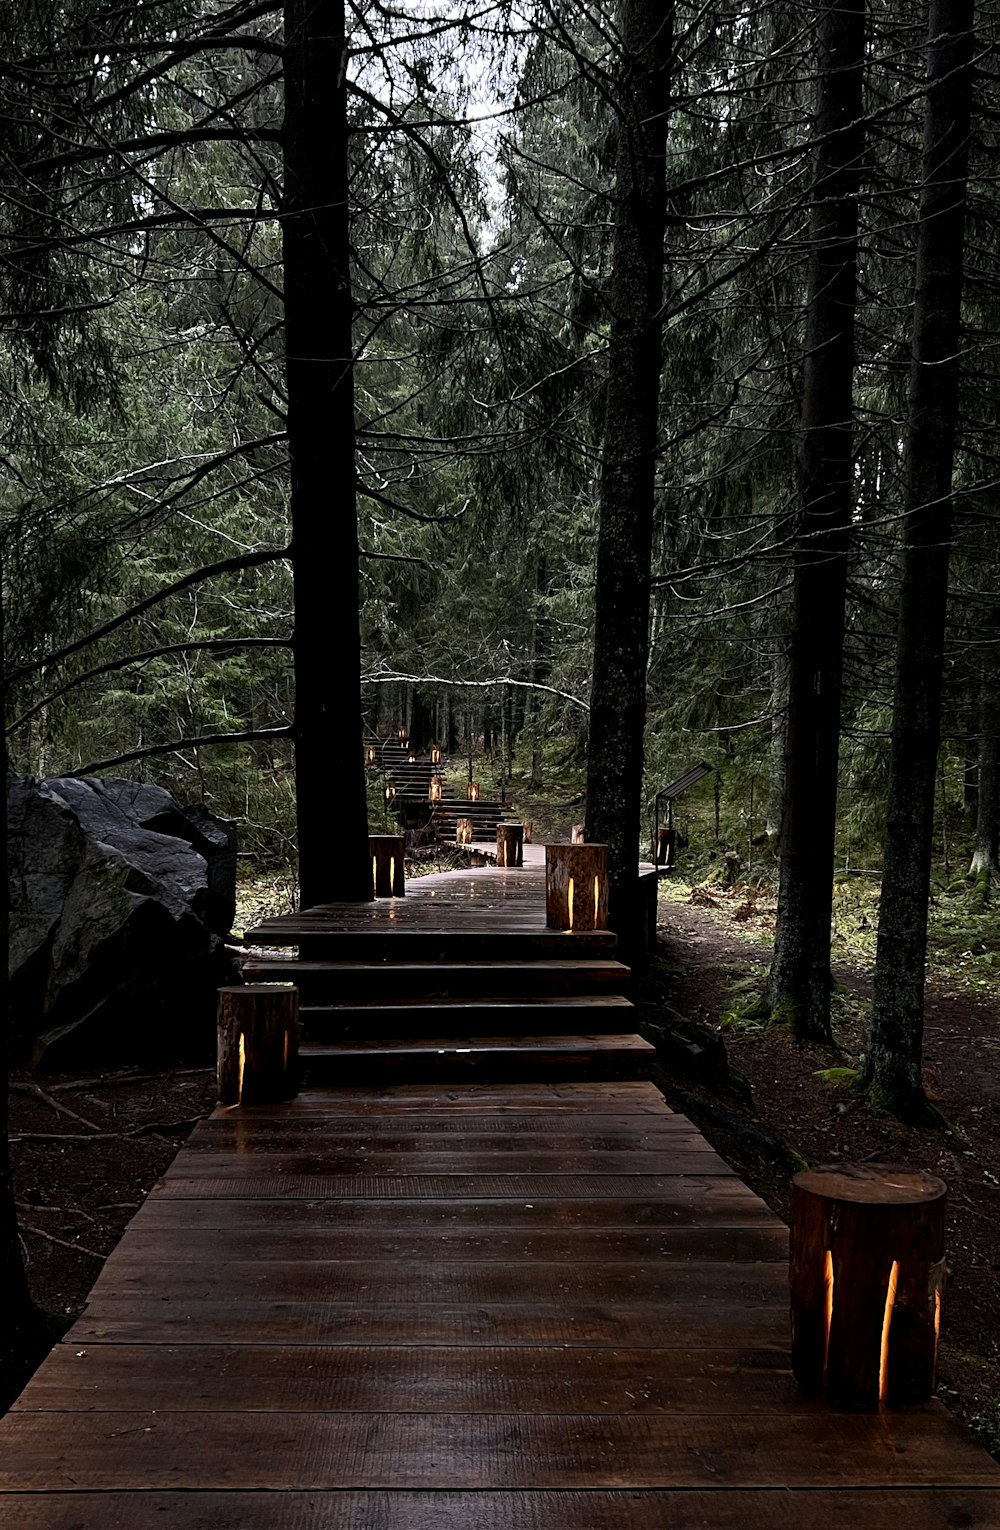 a wooden bridge in a forest